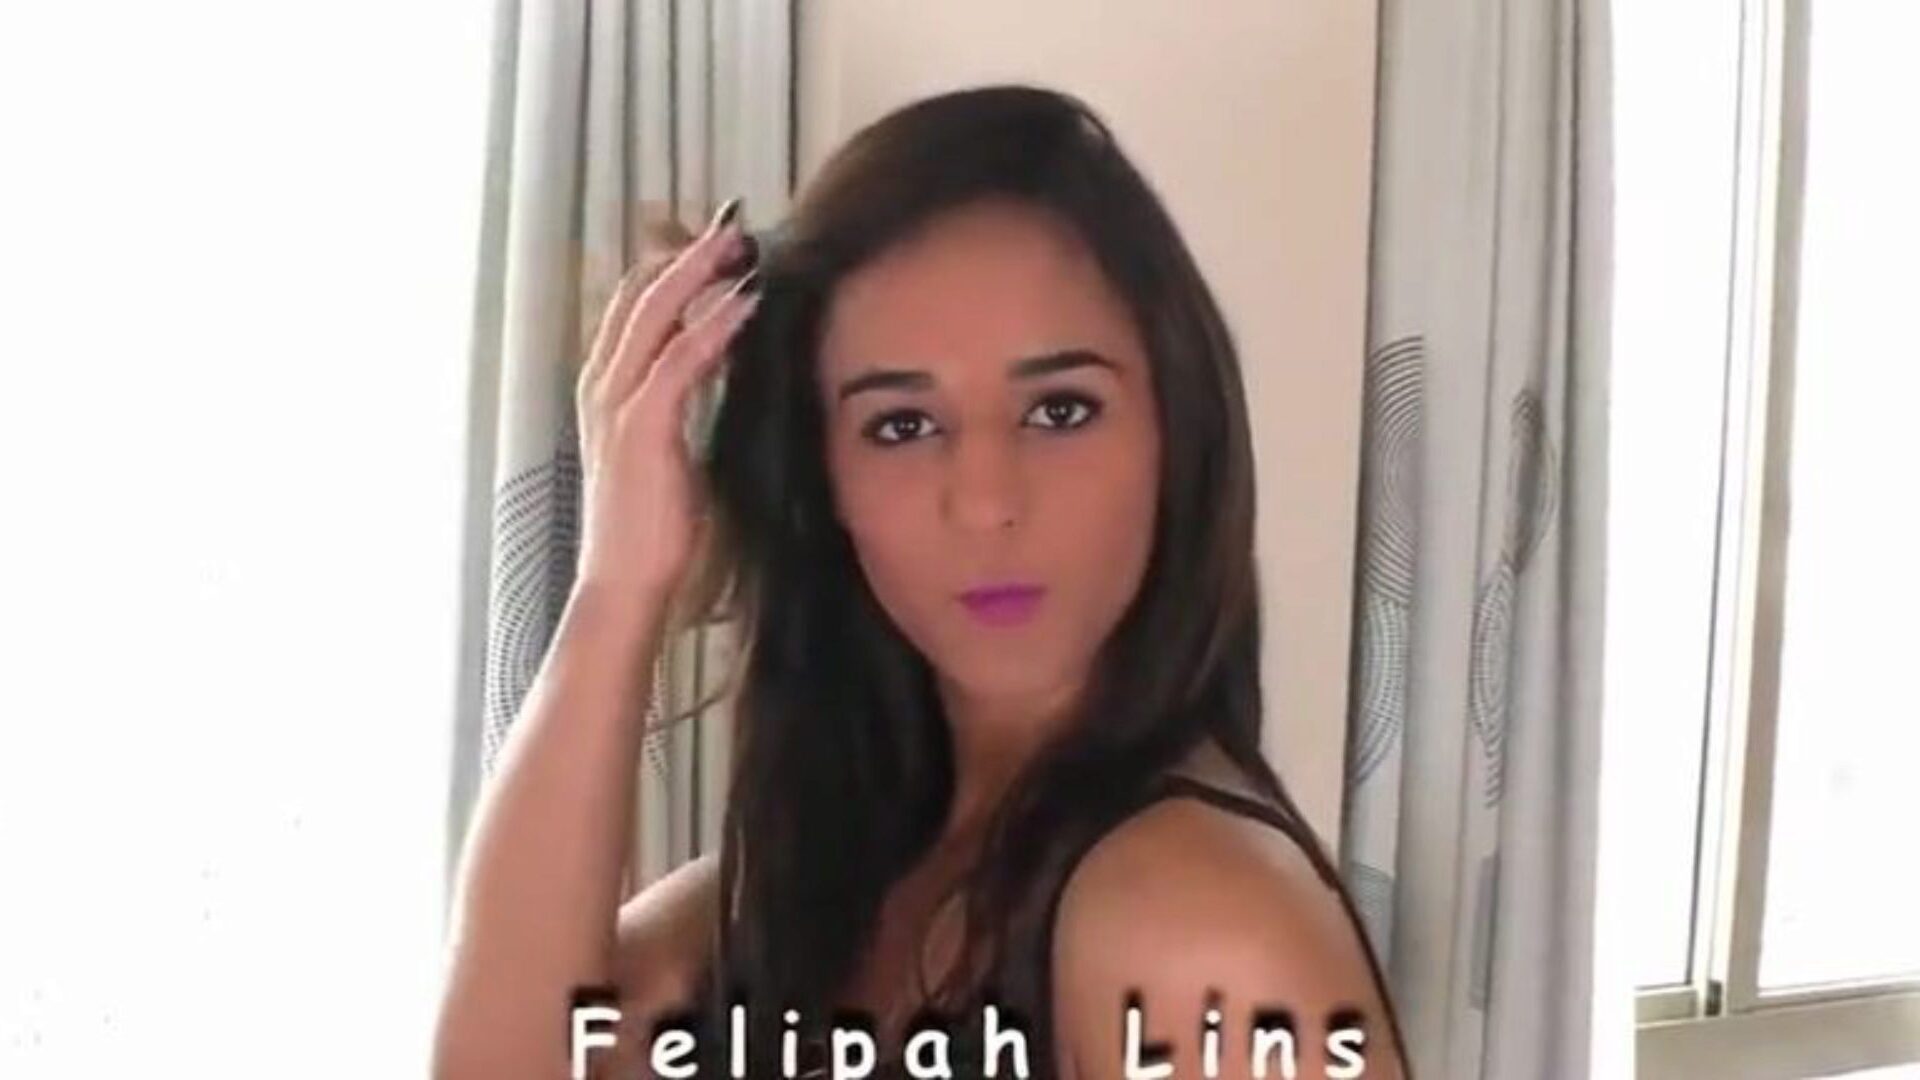 Cute brazilian shelady Felipa Lins fucks dude in his ass-fuck gap Cute brazilian shelady Felipa Lins bonks horny stud in his booty after that playgirl let him boning her ass-fuck condom-free on the couch